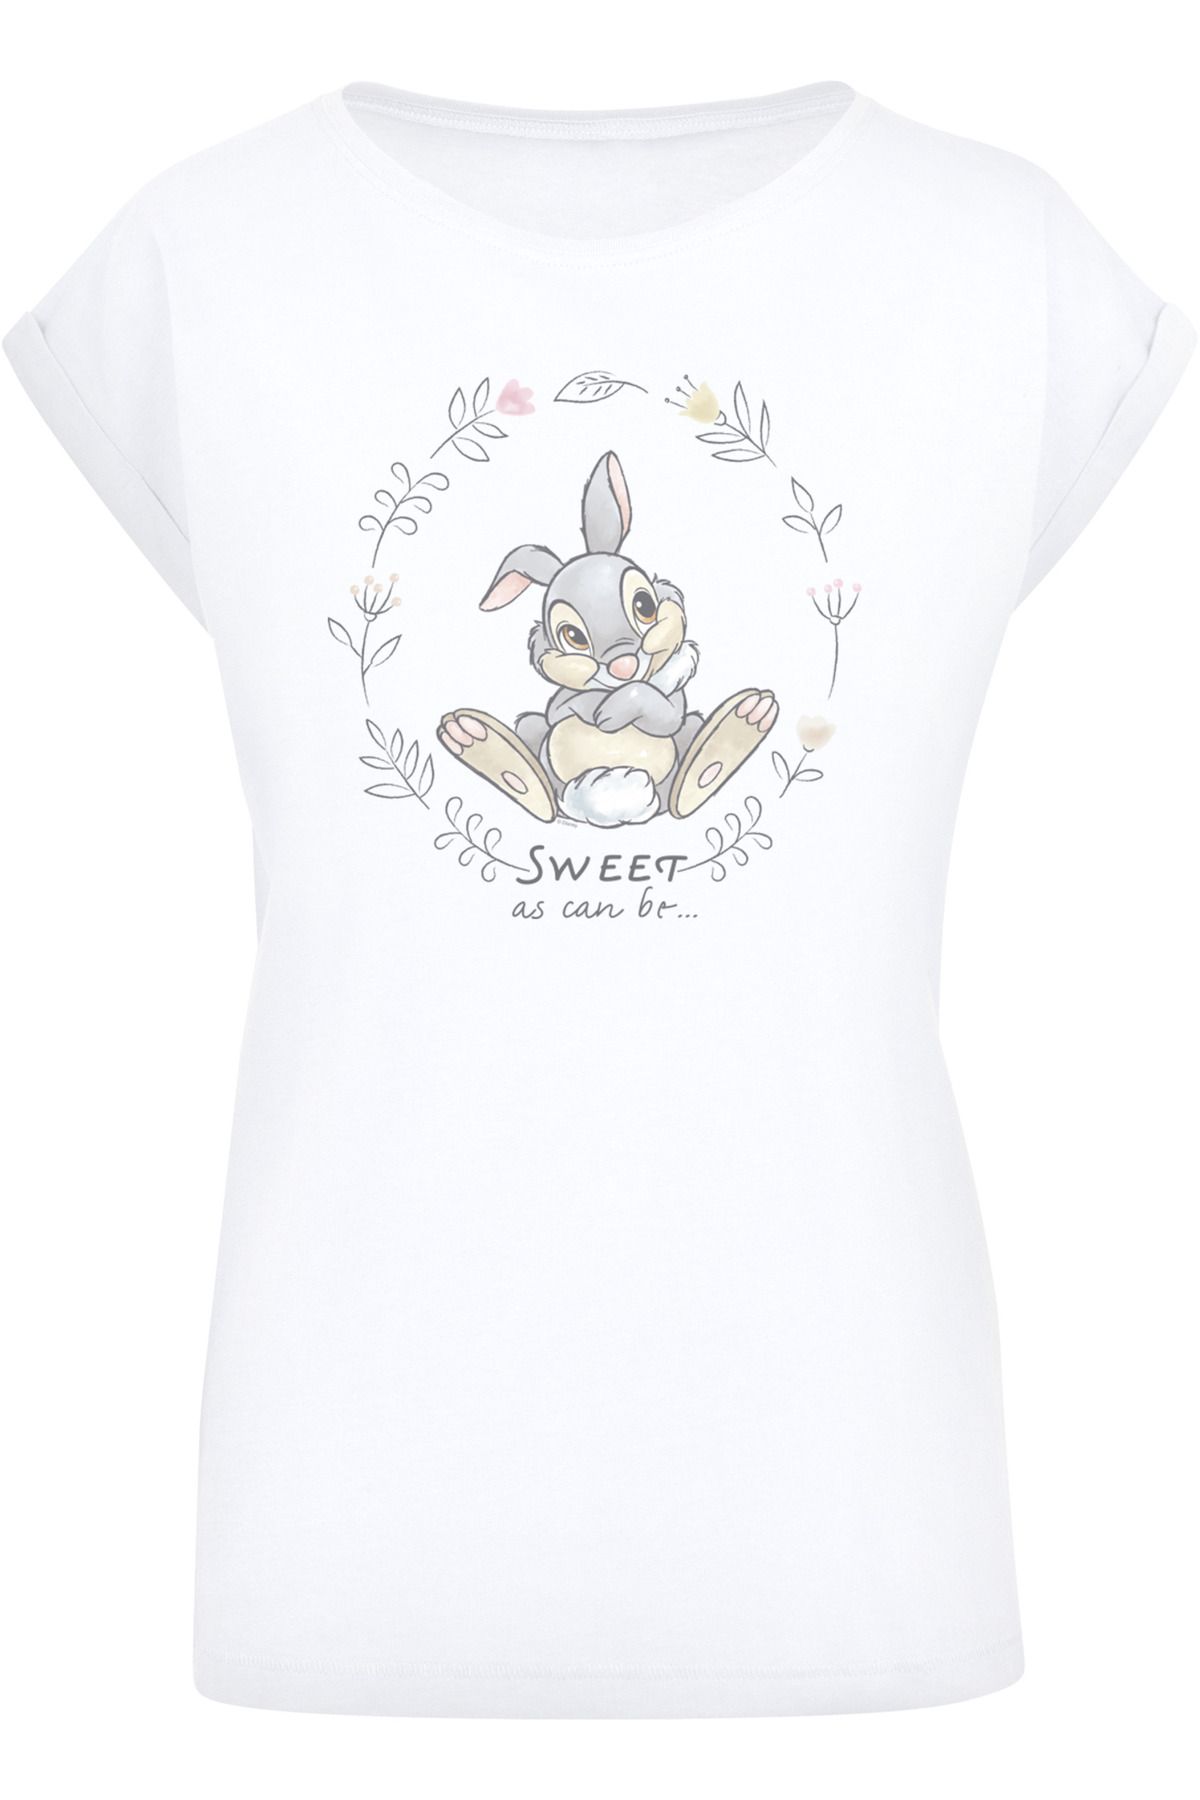 F4NT4STIC Damen Disney - T-Shirt Sweet Thumper Bambi Extended Ladies Trendyol mit Can As Shoulder Be-WHT